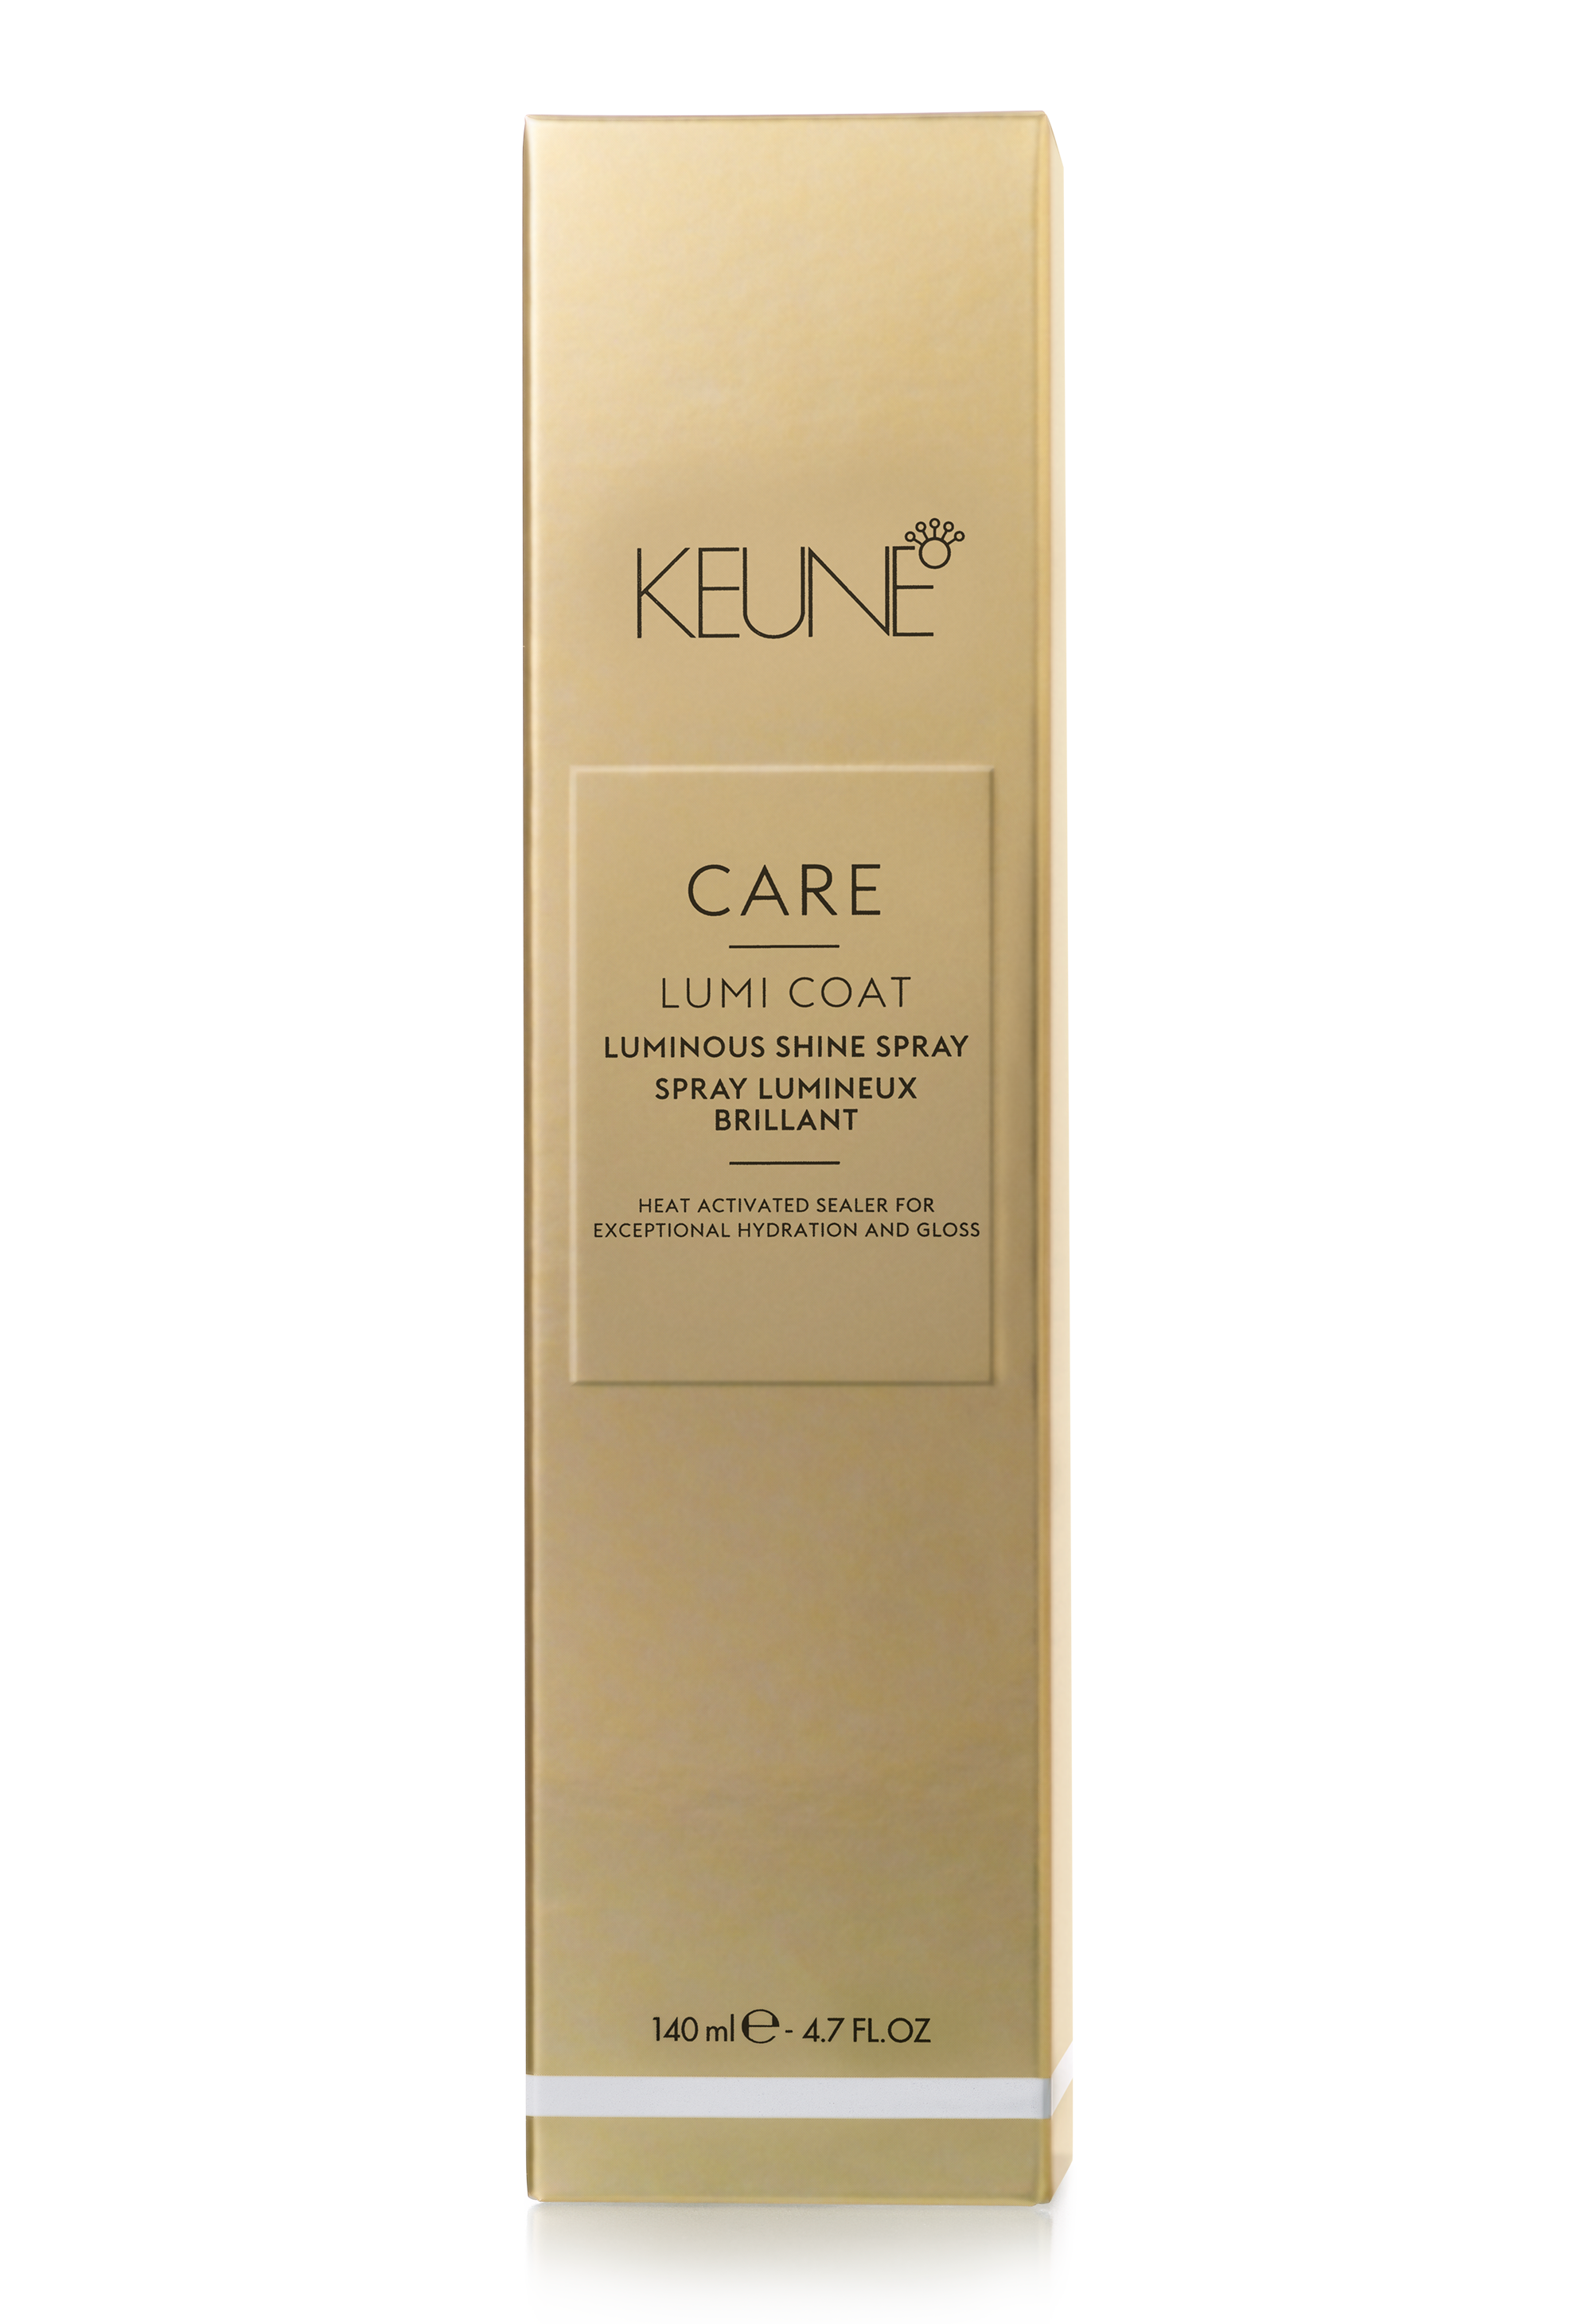 With the Care Lumi Coat Spray, you'll give your hair a silky shine and provide it with moisture. Conditioner leave-in protect your hair from further damage. On keune.ch.